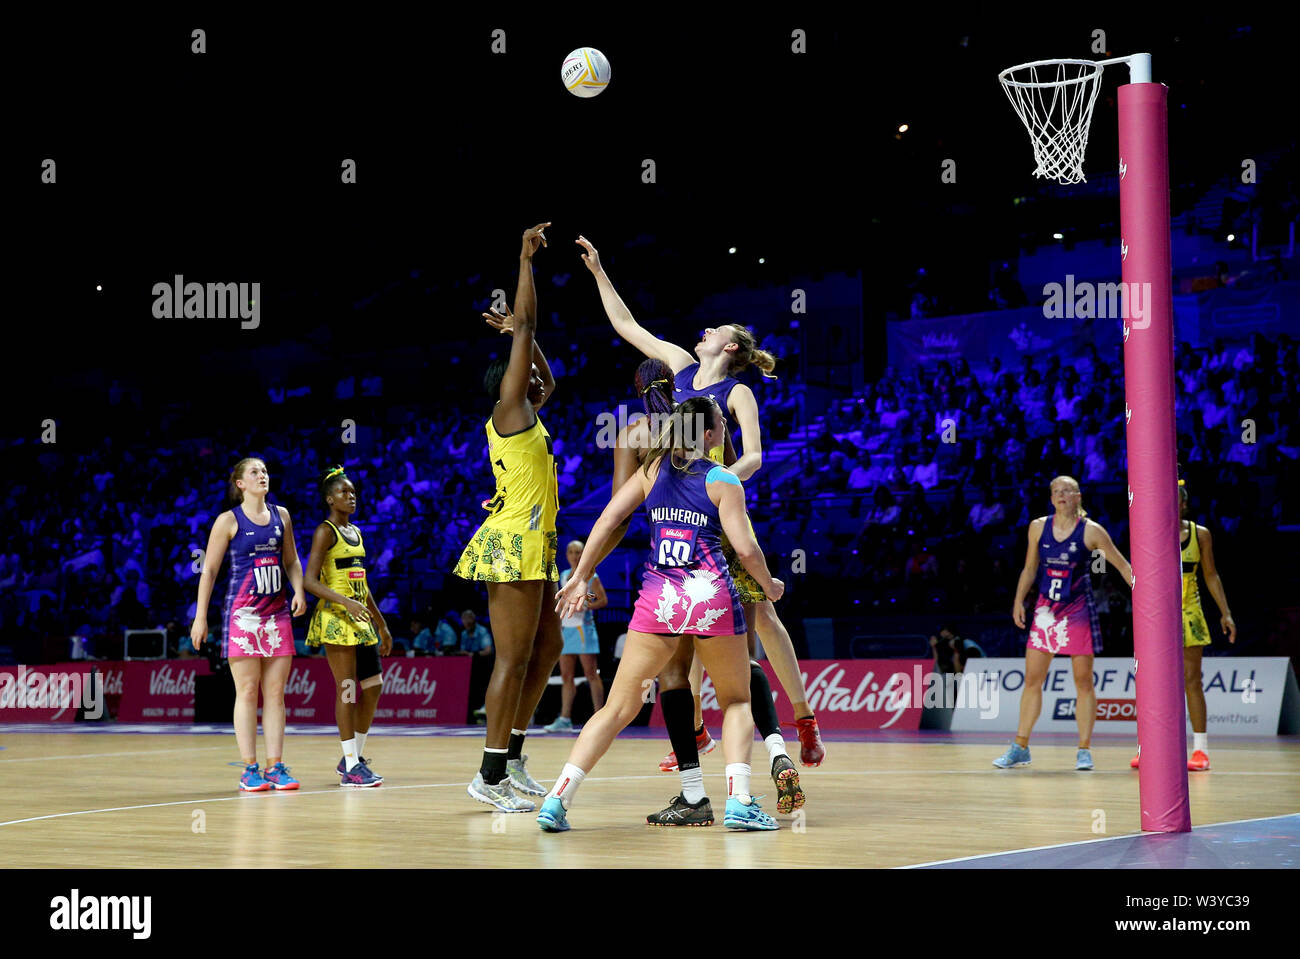 A general view of match action between Jamaica and Scotland during the Netball World Cup match at the M&S Bank Arena, Liverpool. Stock Photo